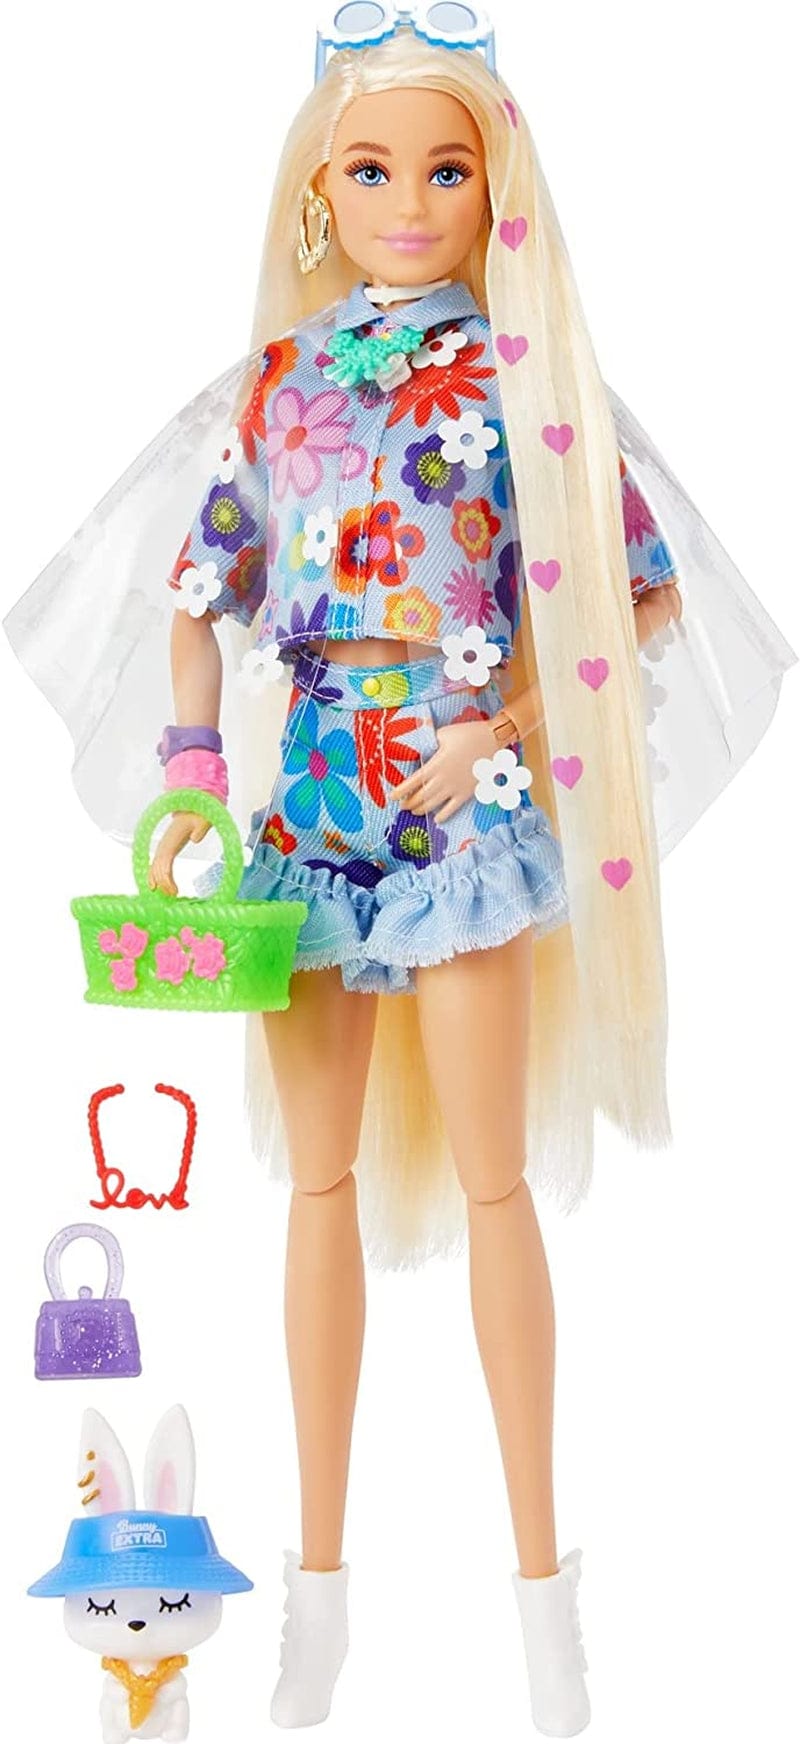 Barbie Dolls and Accessories, Barbie Extra Fashion Doll, Long Blonde Hair with Heart Icons and Pet Bunny, Floral Fashion, Toys and Gifts for Kids Sporting Goods > Outdoor Recreation > Winter Sports & Activities Mattel Bonde Floral Fashion  